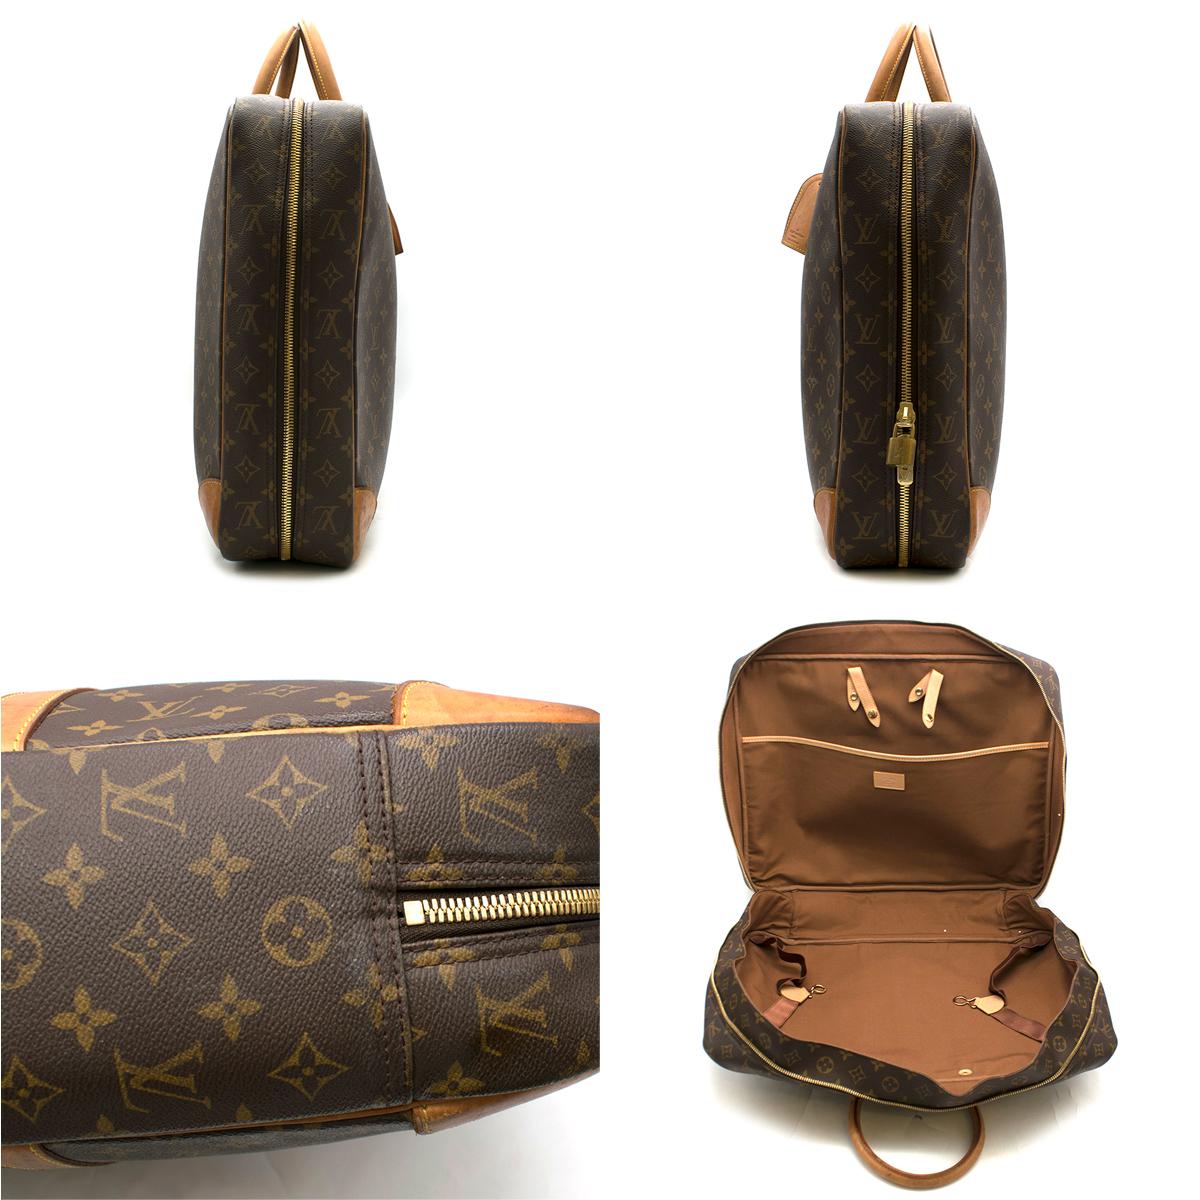 Louis Vuitton Sirius 55 Soft sided Luggage One size 3